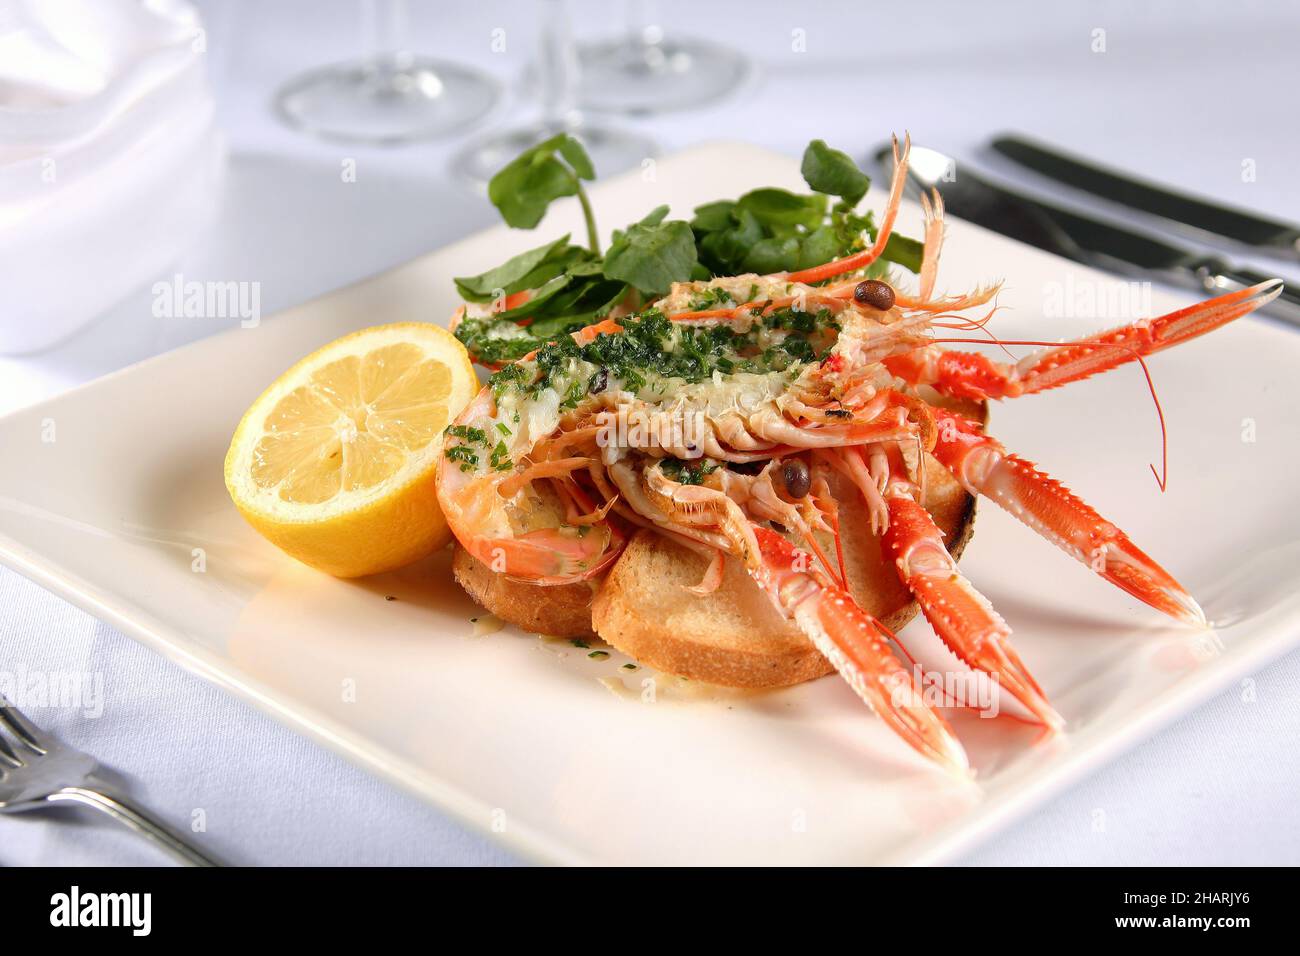 Langoustine Norway lobster Dublin Bay prawn scampi with herb butter lemon and salad Stock Photo